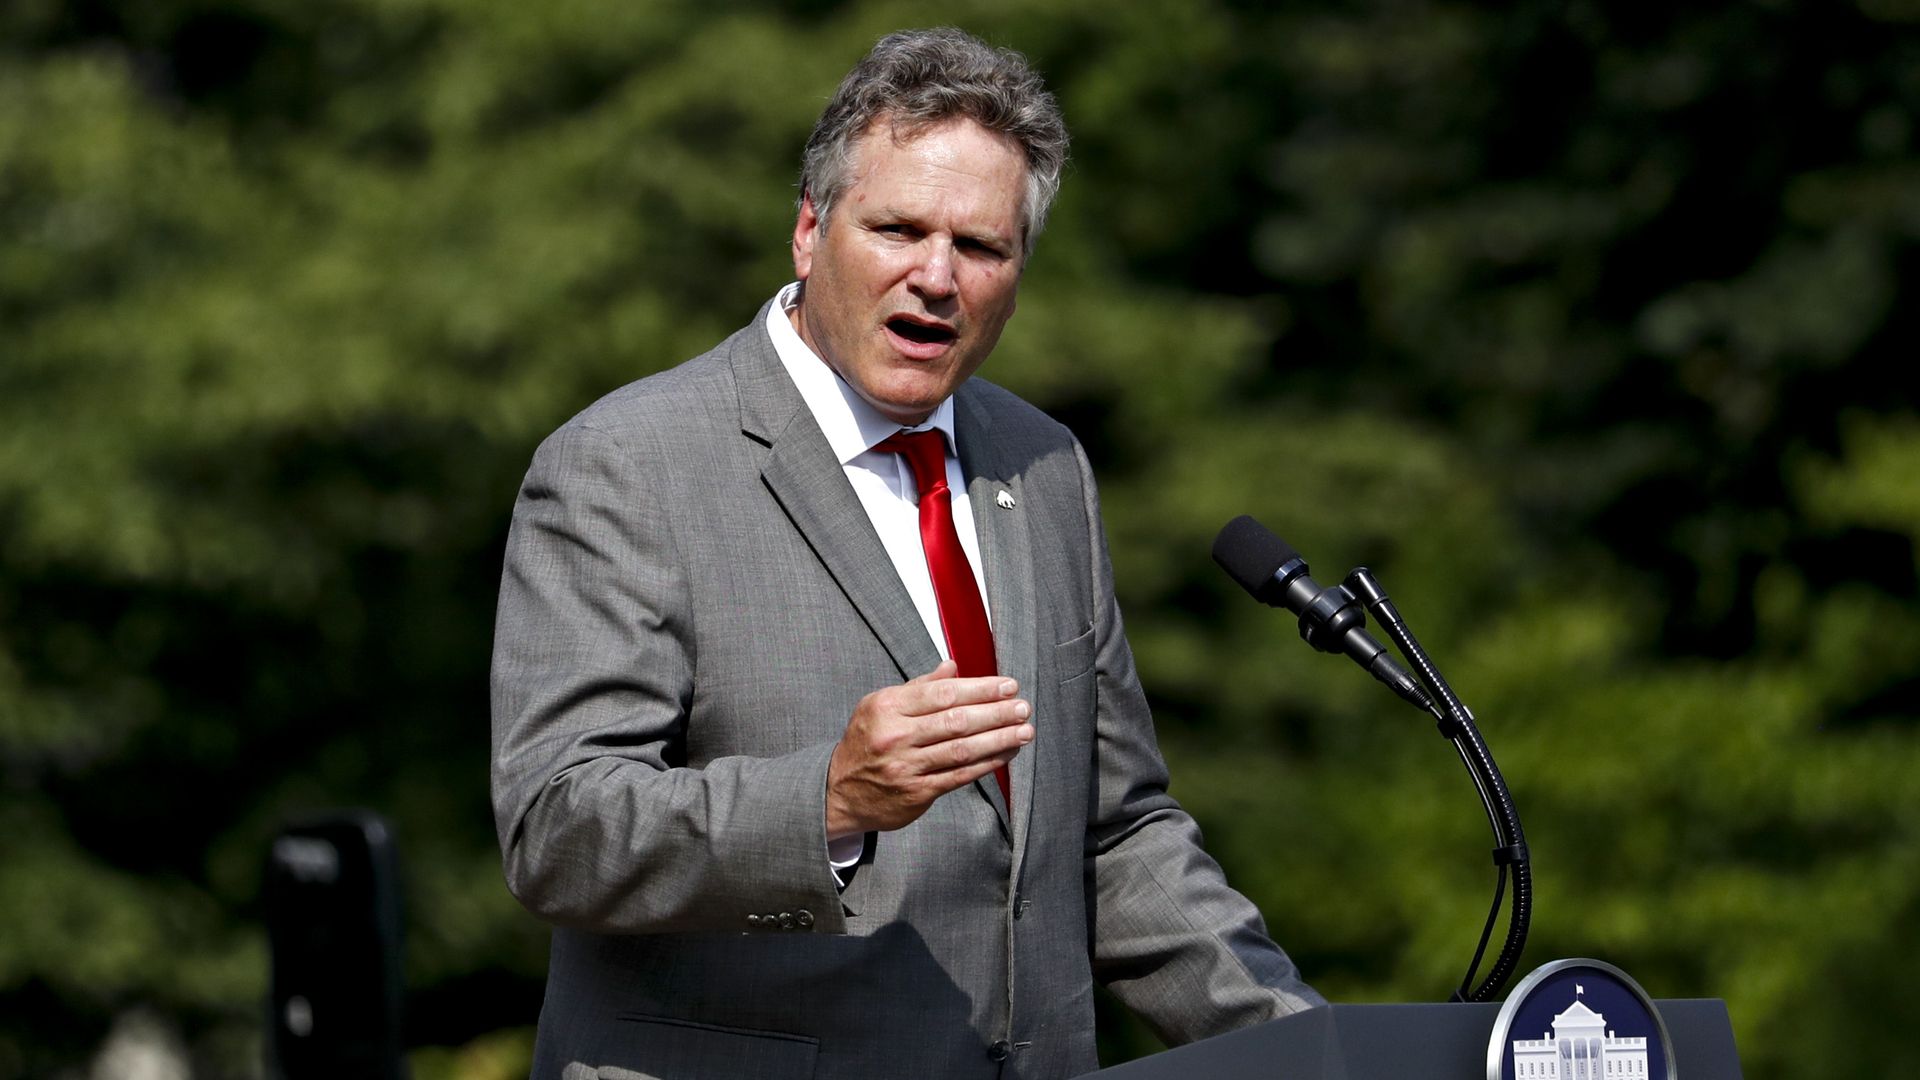 Michael Dunleavy, governor of Alaska, speaks during an event on the South Lawn of the White House 